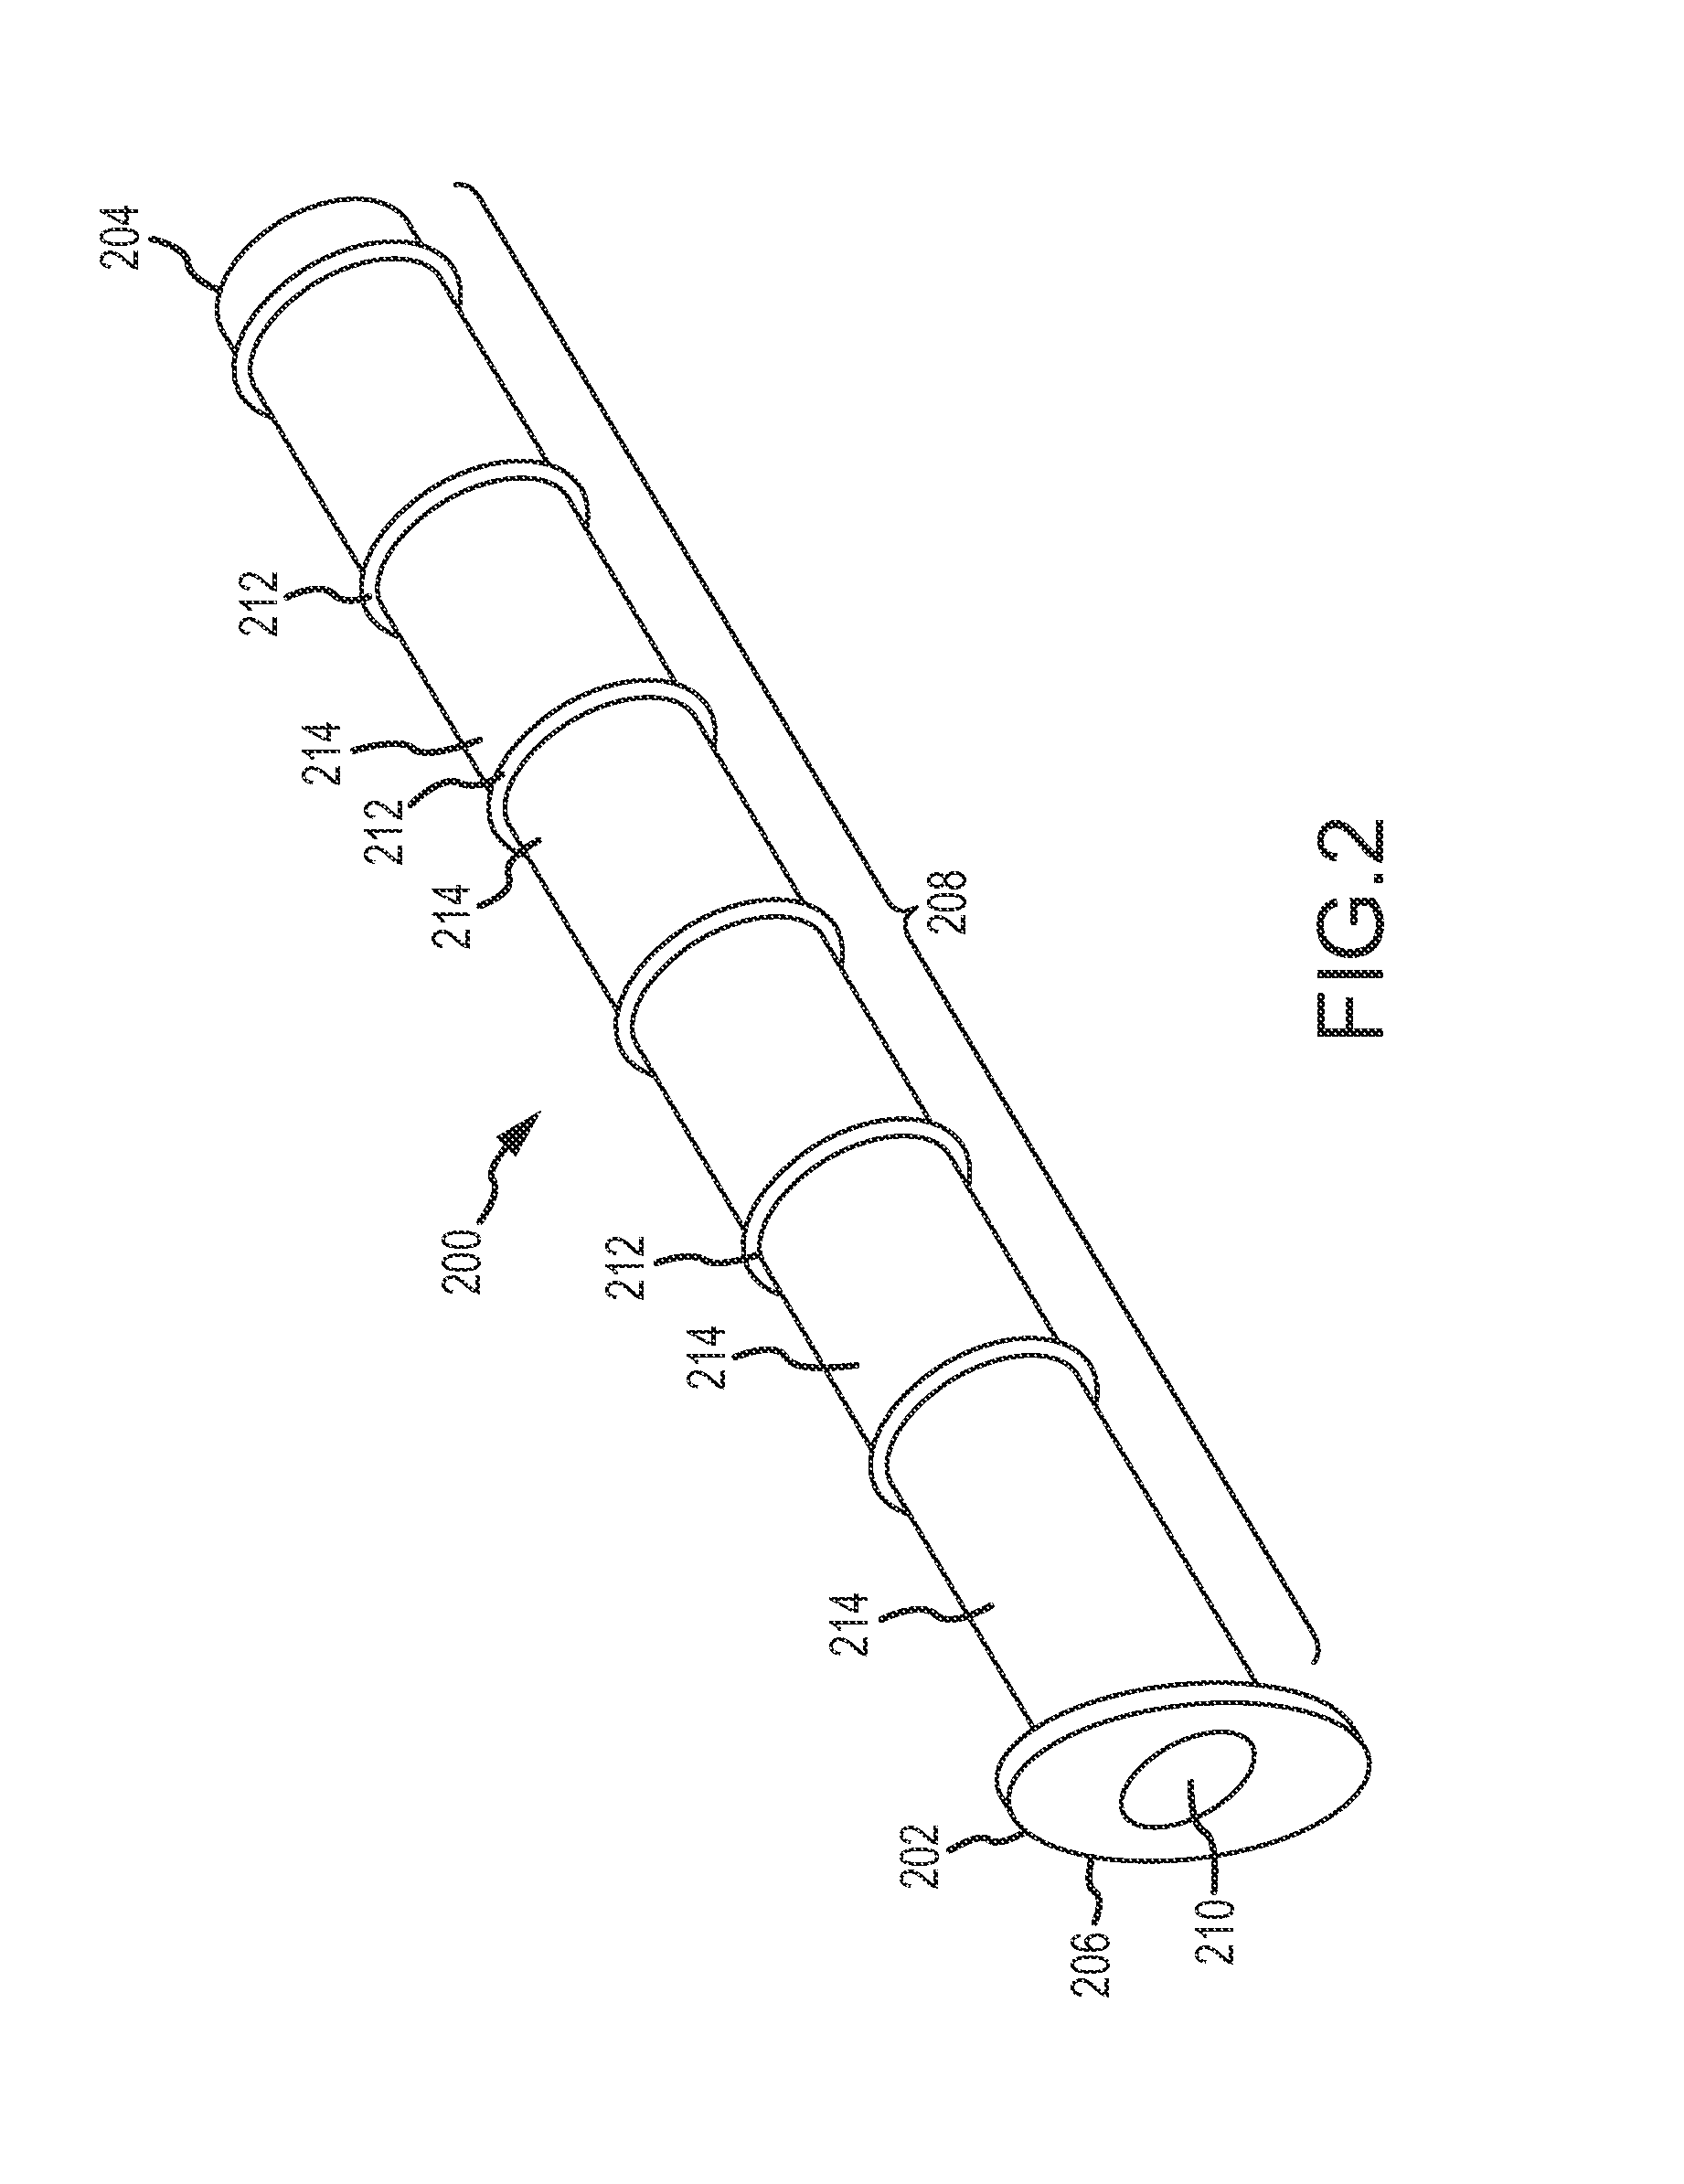 Paranasal sinus access implant devices and related tools, methods and kits